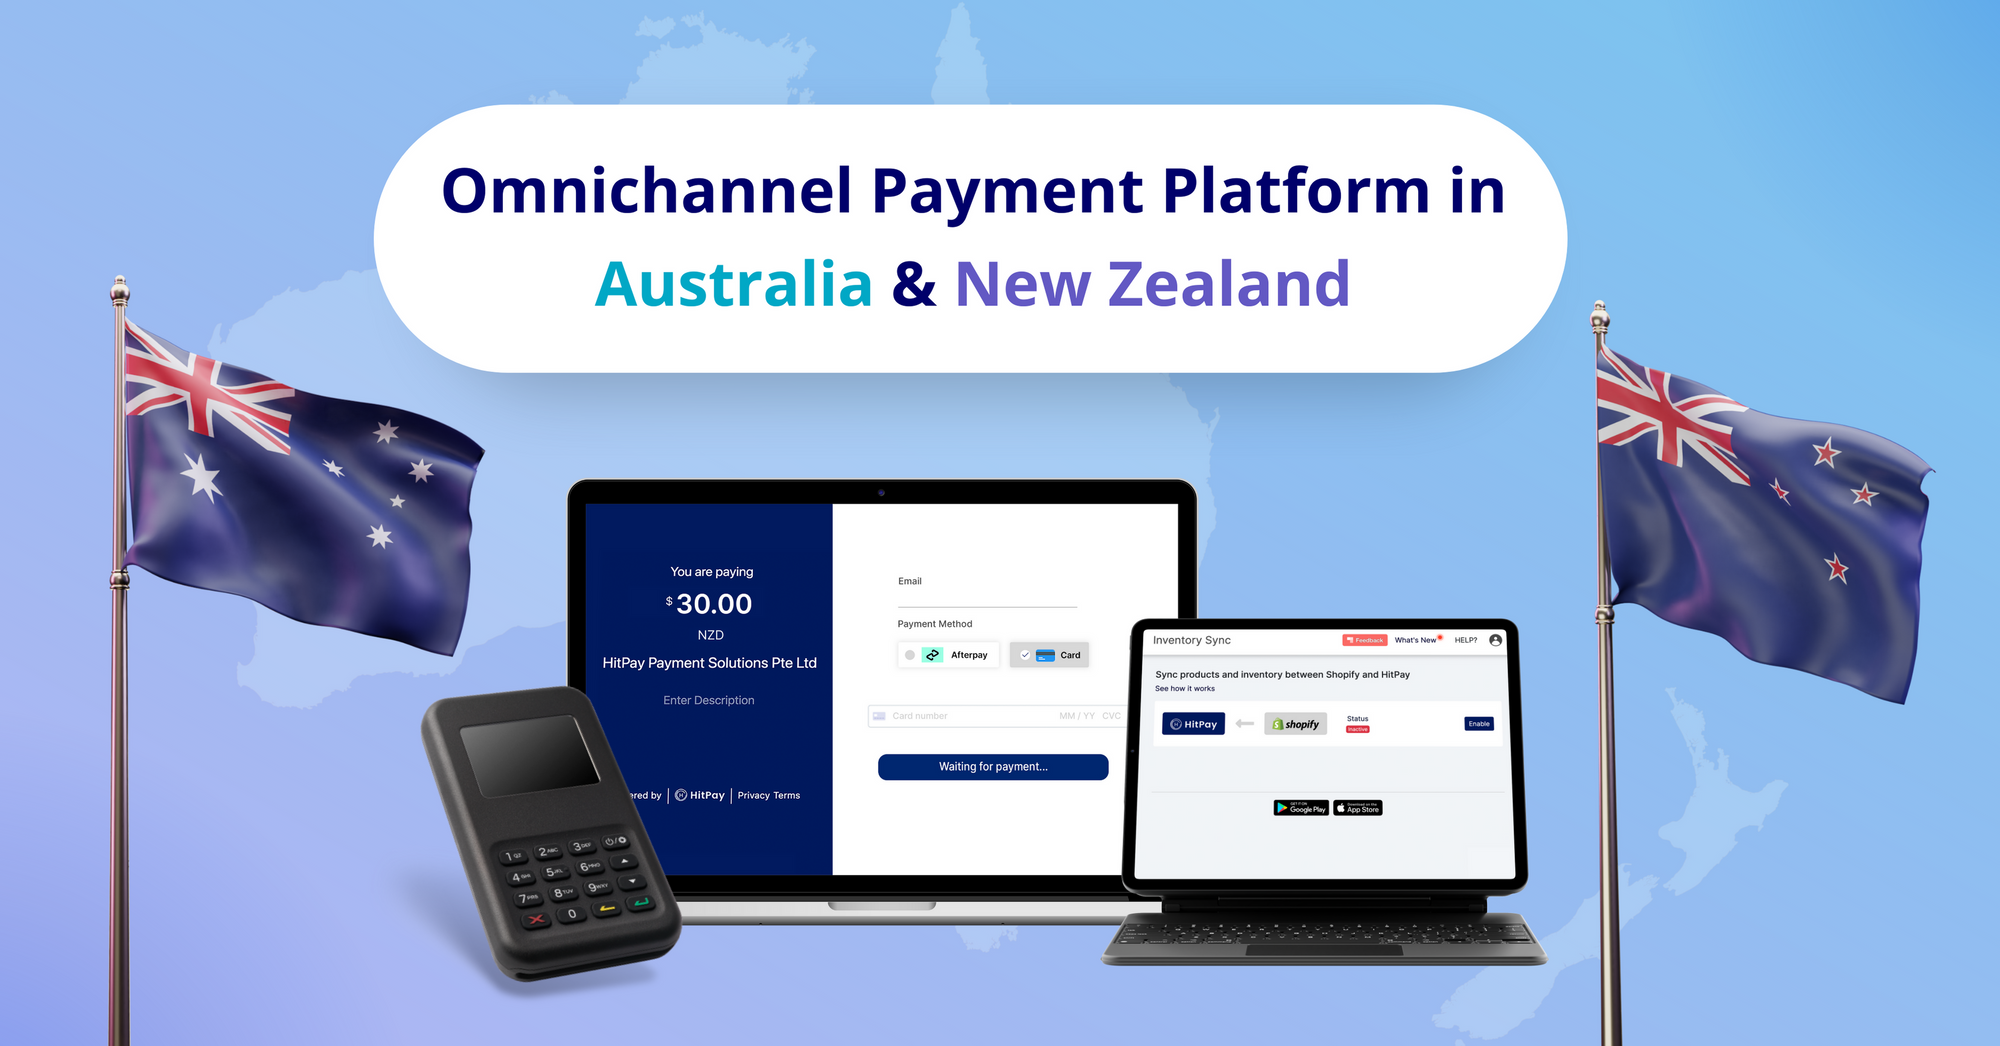 HitPay launches omnichannel payment platform in Australia and New Zealand